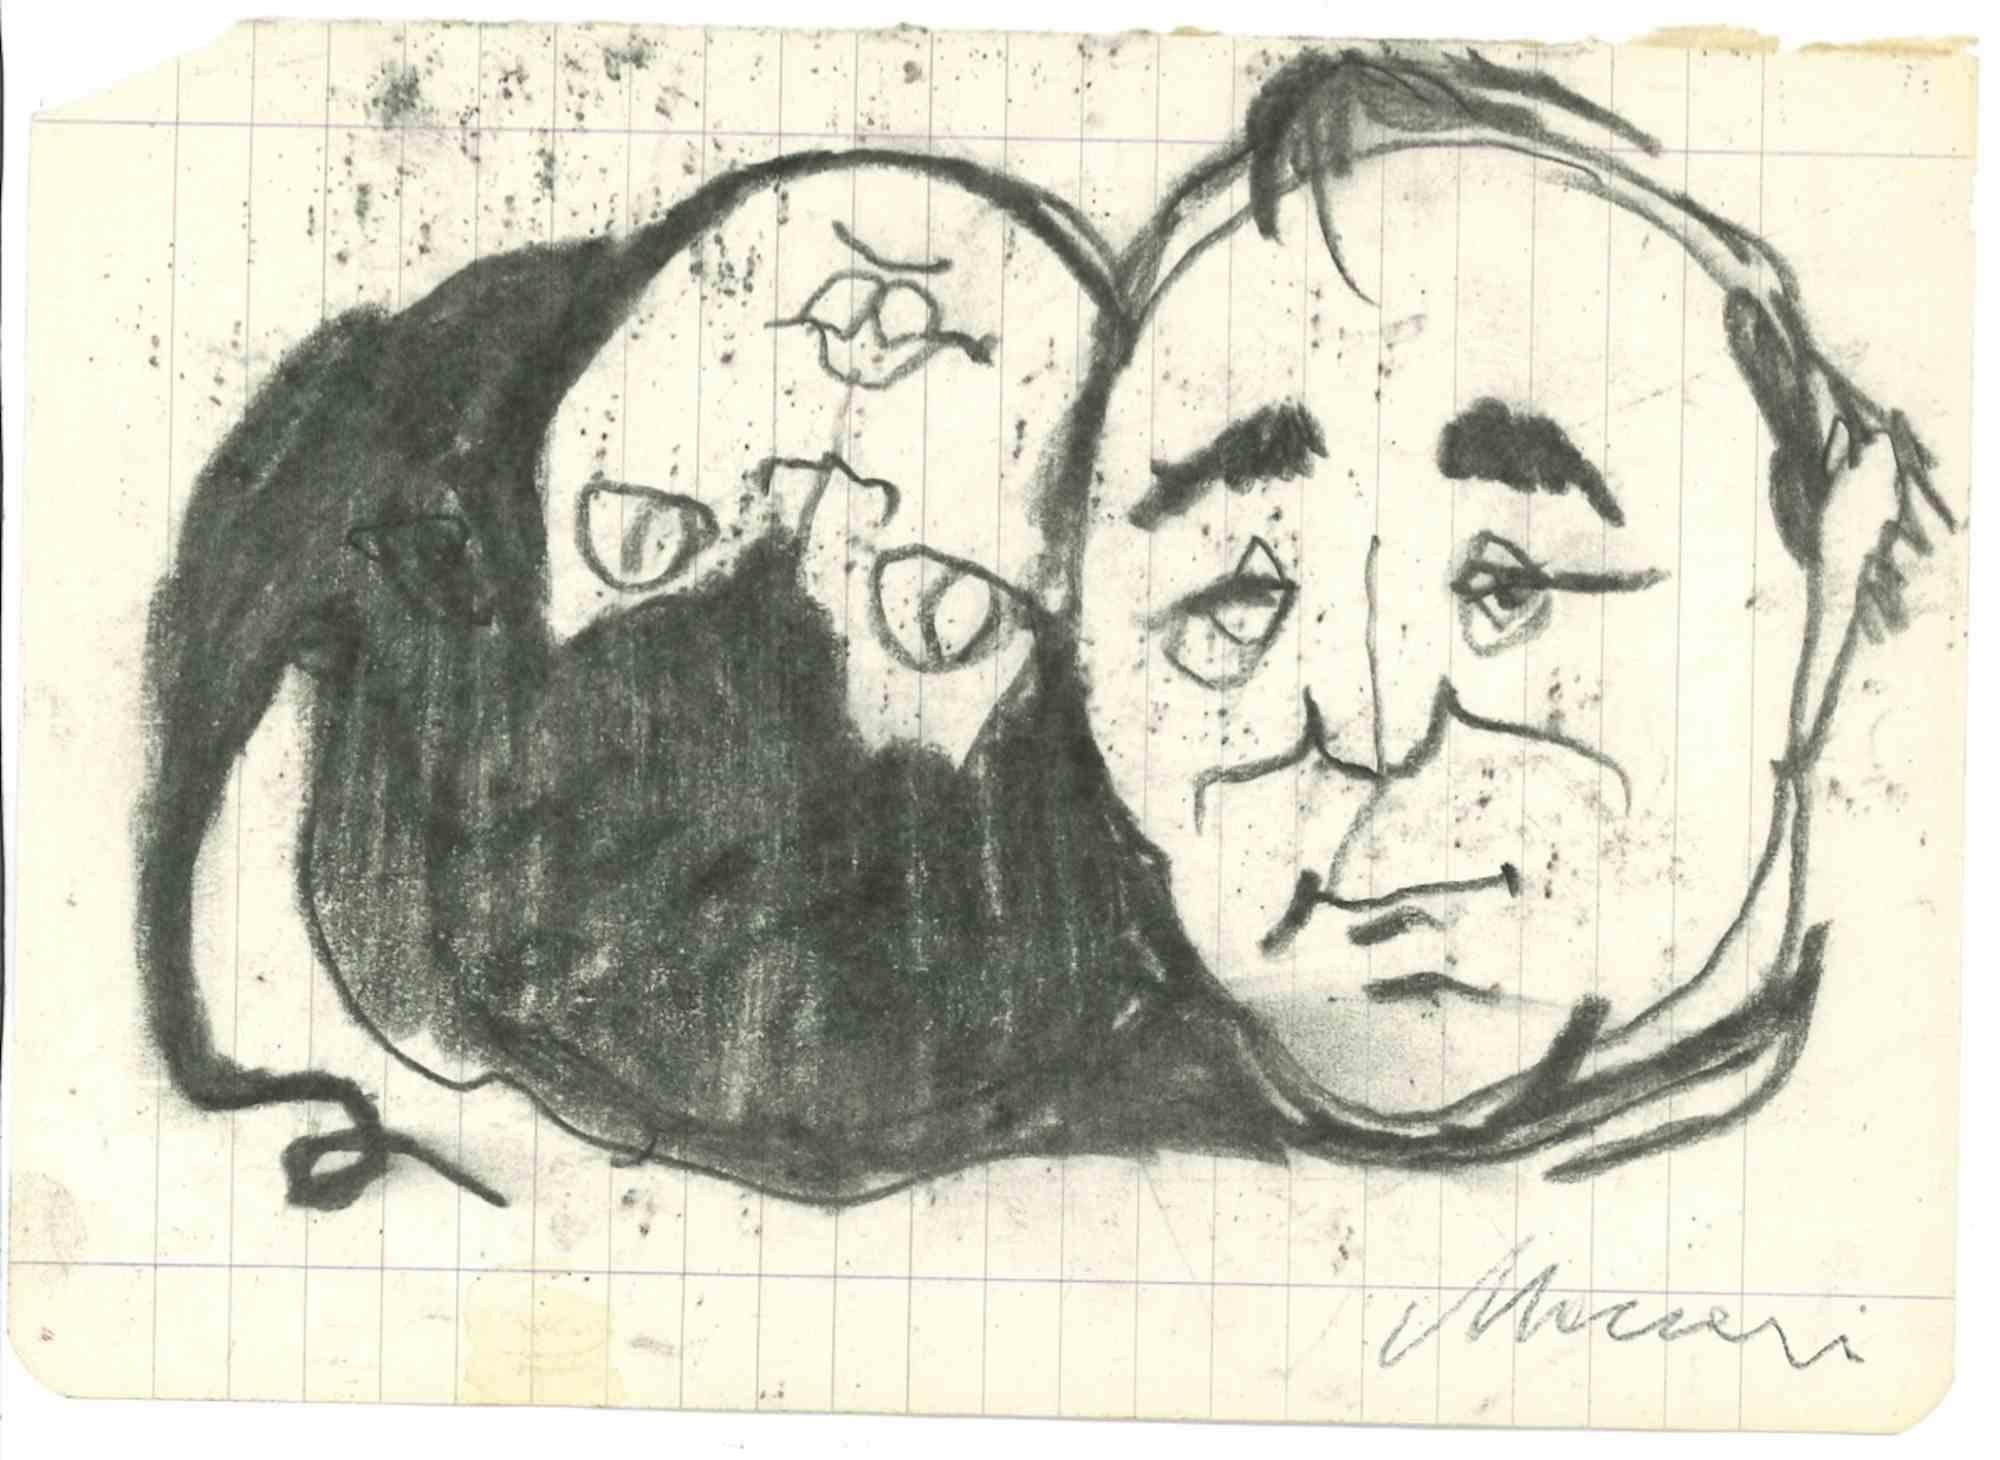 Portraits is a charcoal drawing realized by Mino Maccari  (1924-1989) in the Mid-20th Century.

Hand-signed.

Good conditions with slight foxing.

Mino Maccari (Siena, 1924-Rome, June 16, 1989) was an Italian writer, painter, engraver and